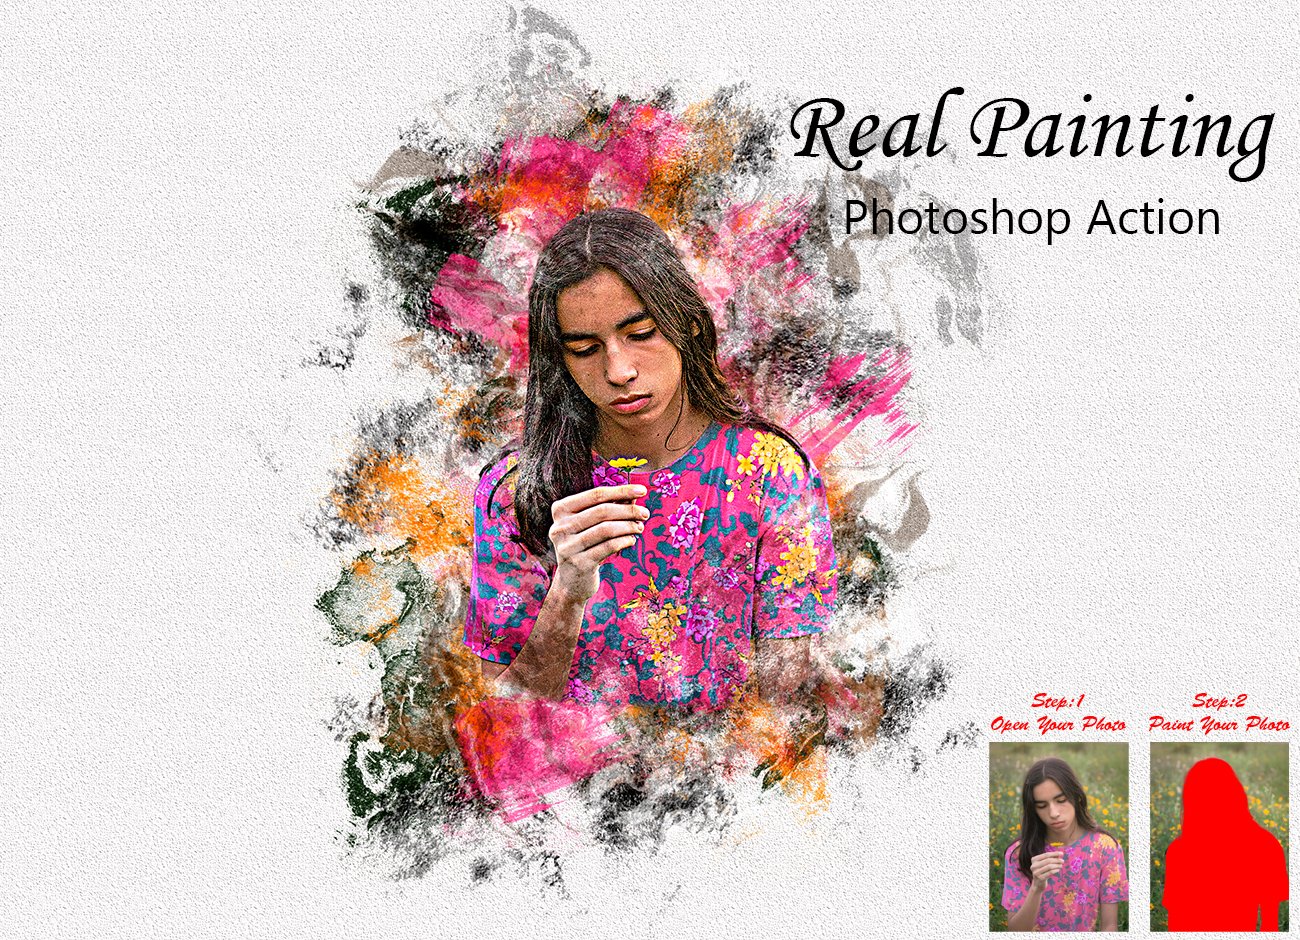 Real Painting Photoshop Actioncover image.